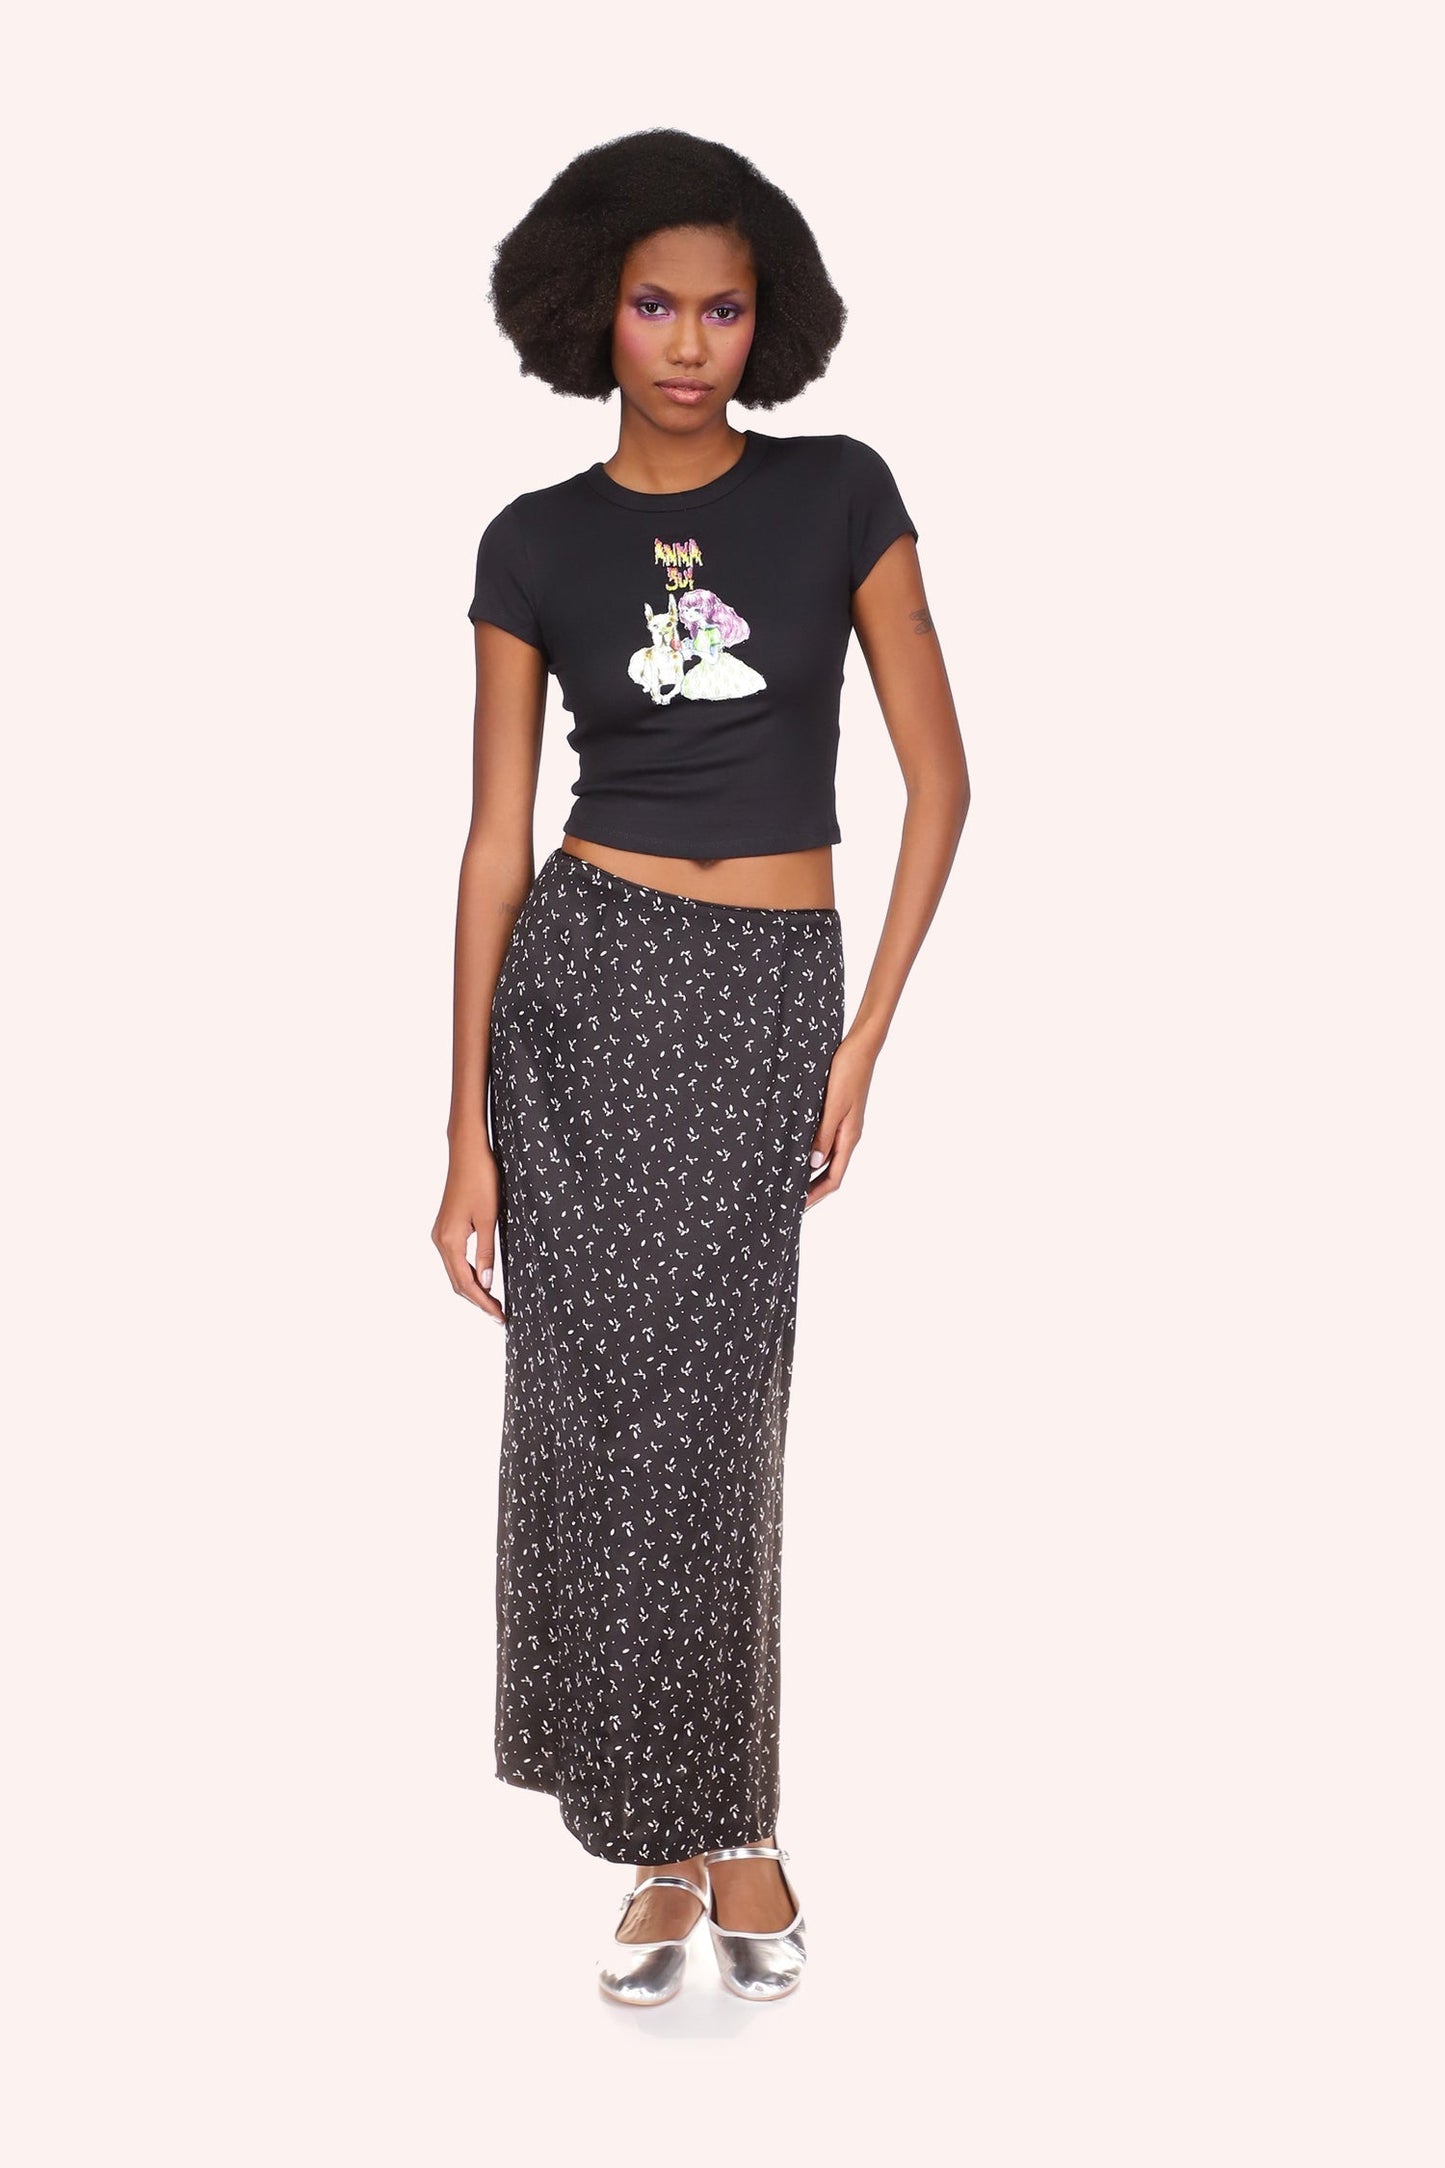 Micro Ribbed Baby Tee Black, Anna Sui logo above a stylized pink girl with a large white dog